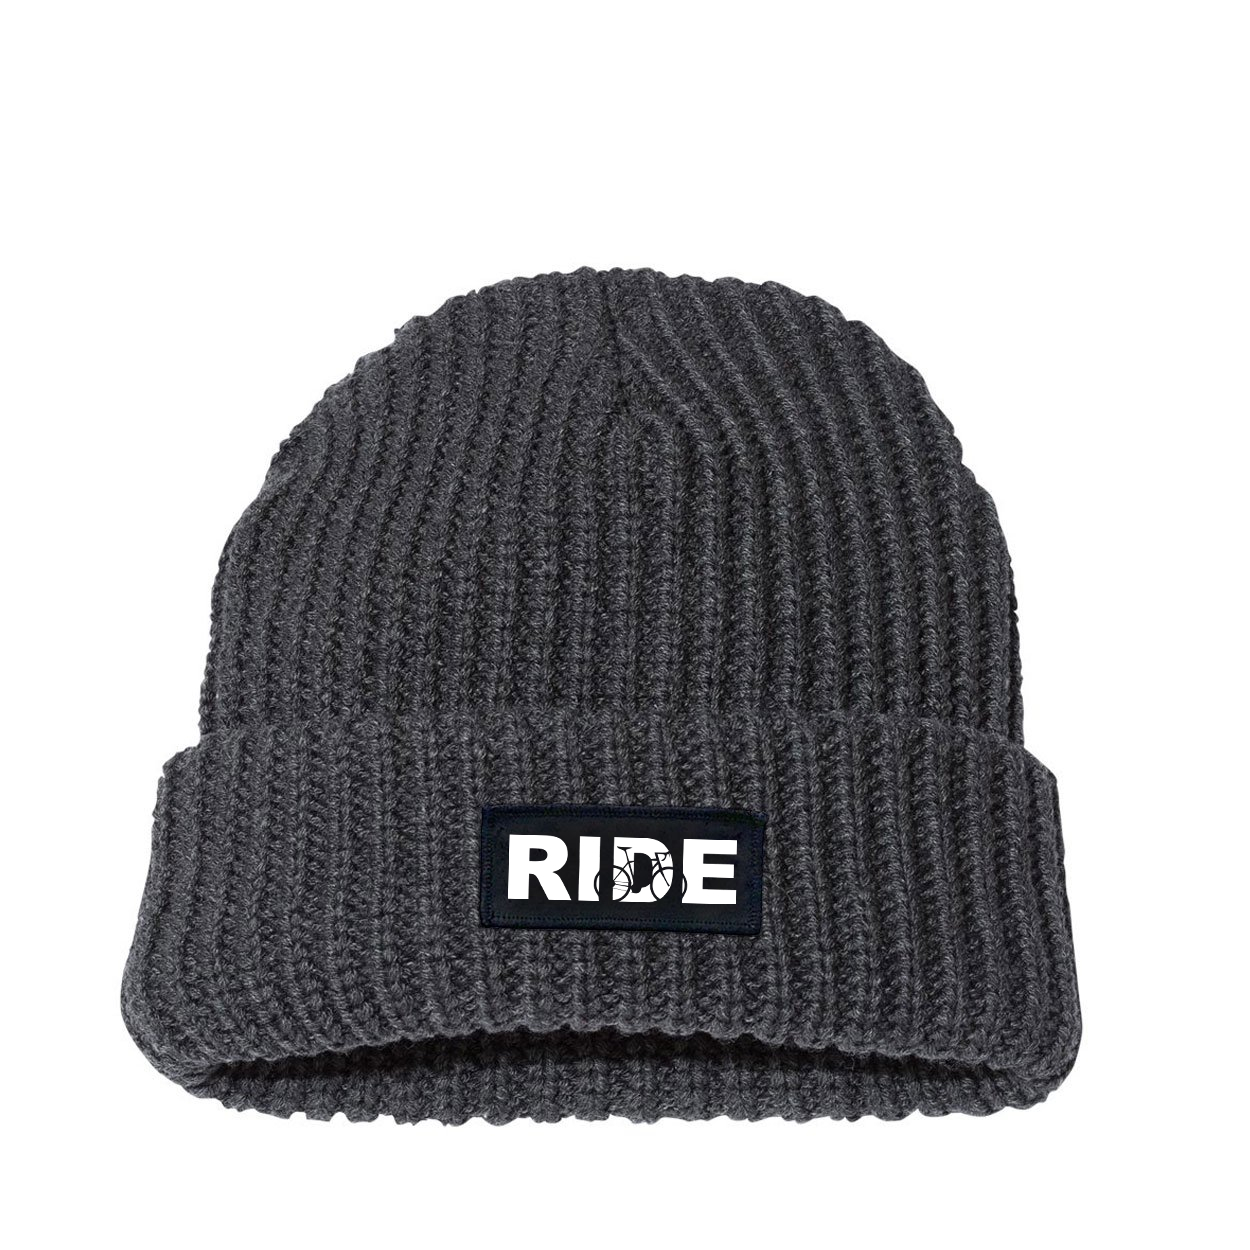 Ride Cycle Logo Night Out Woven Patch Roll Up Jumbo Chunky Knit Beanie Charcoal (White Logo)